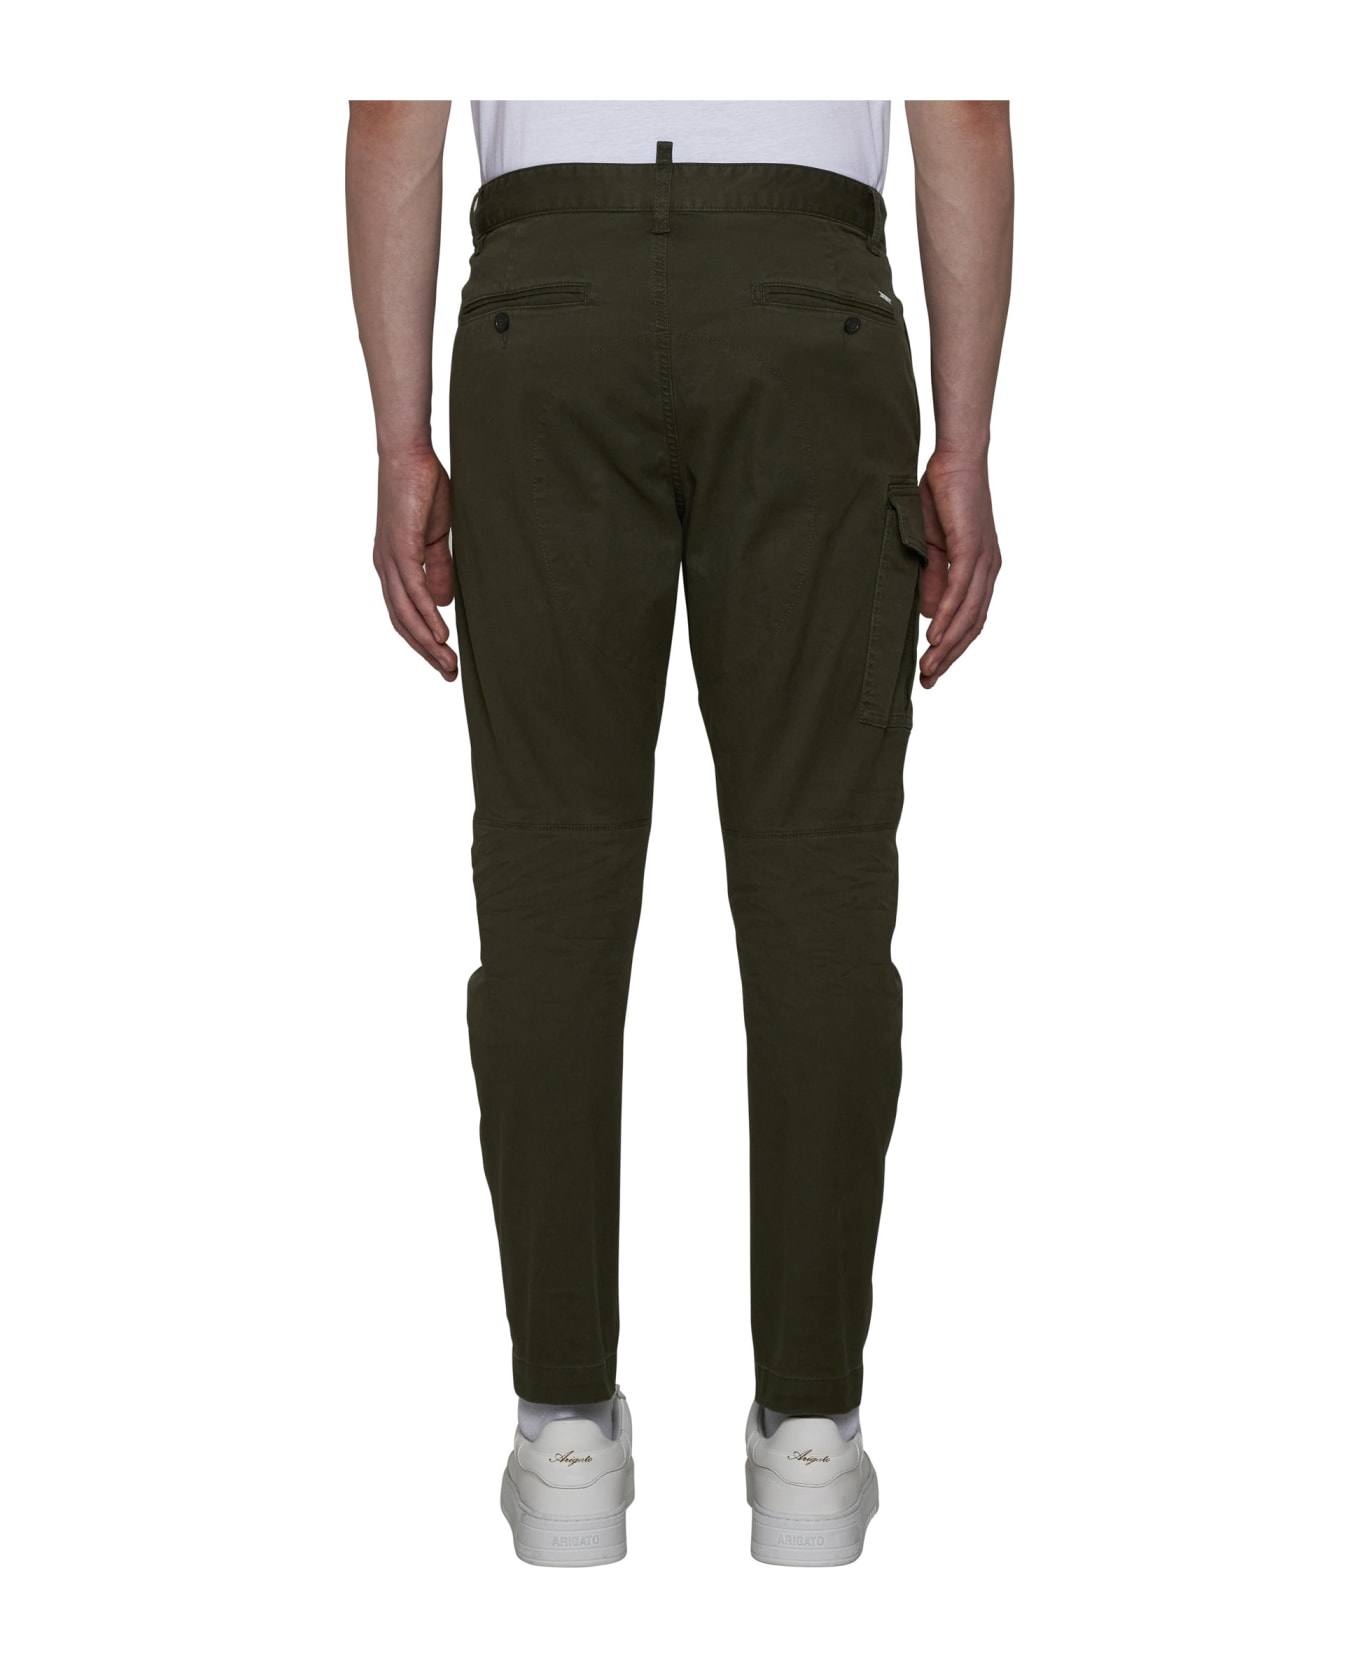 Dsquared2 Pants - Military green